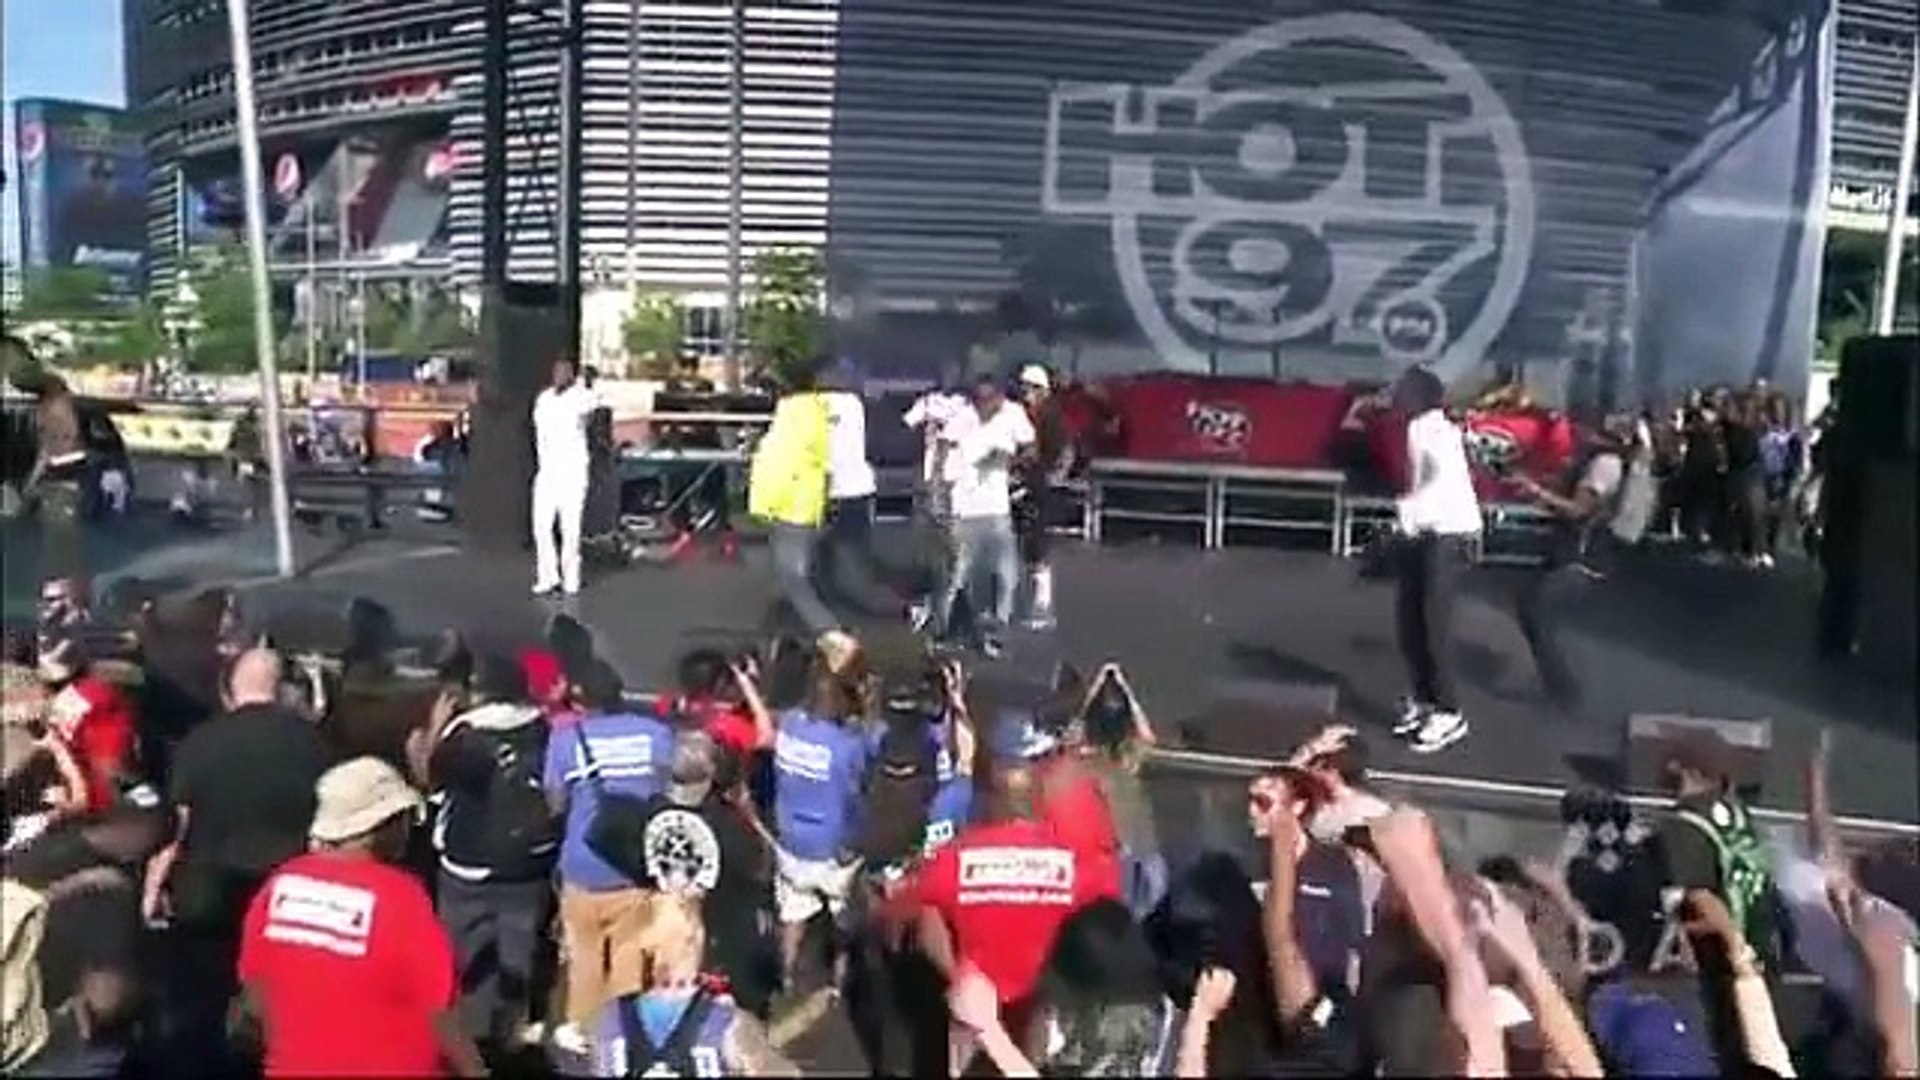 Travis Scott brings out 2Milly to perform “Milly Rock” at Hot97 summer jam 2015